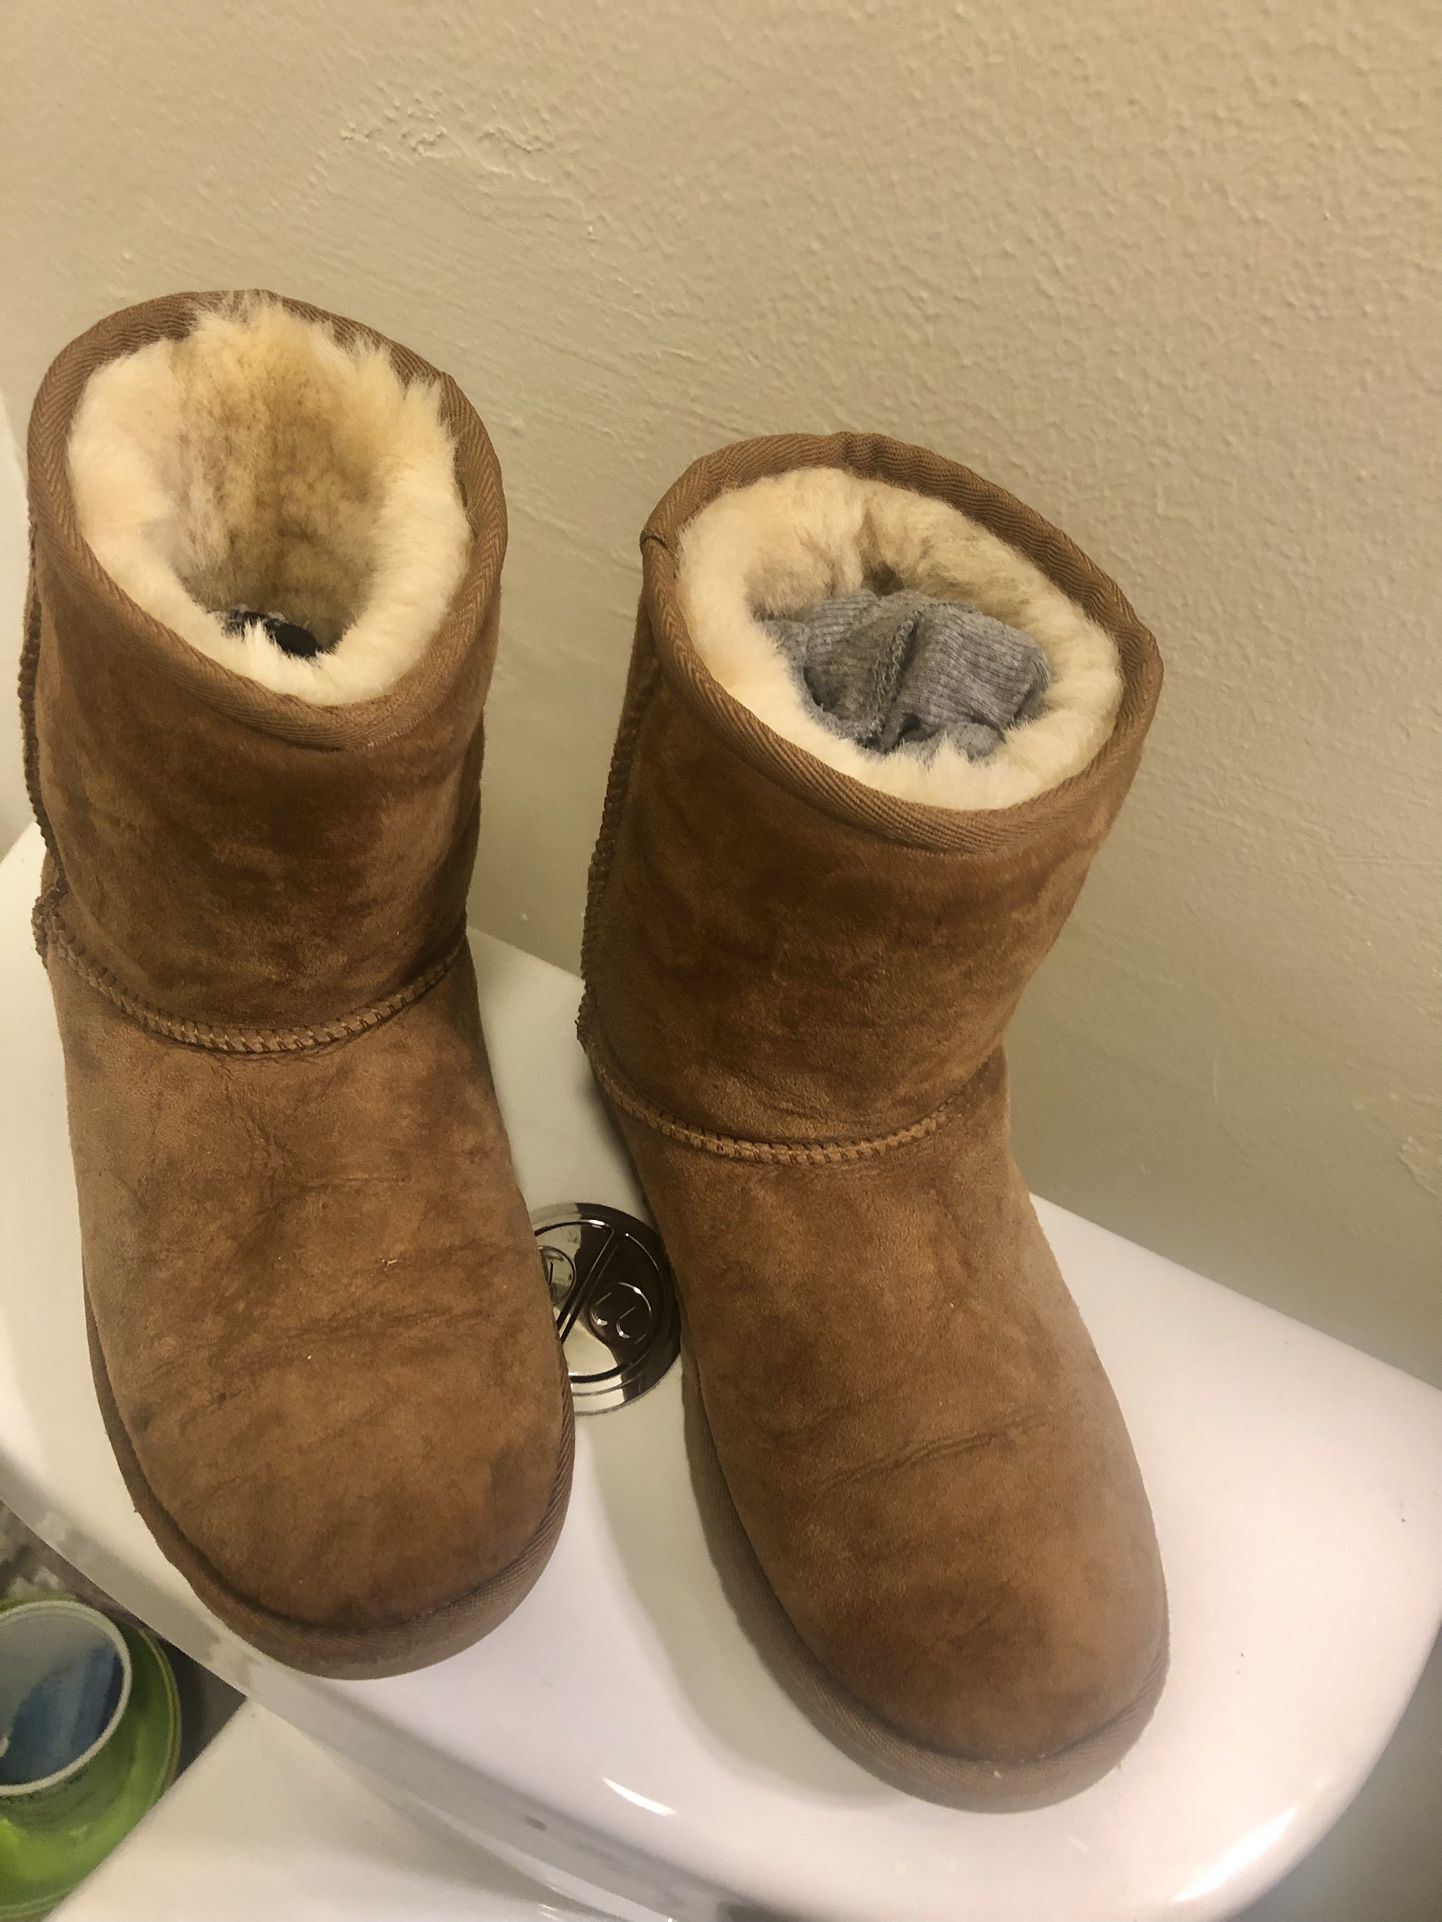 Ugg Boots Size #3 $25 Serious People Please Local Pick Up Only No Delivery 